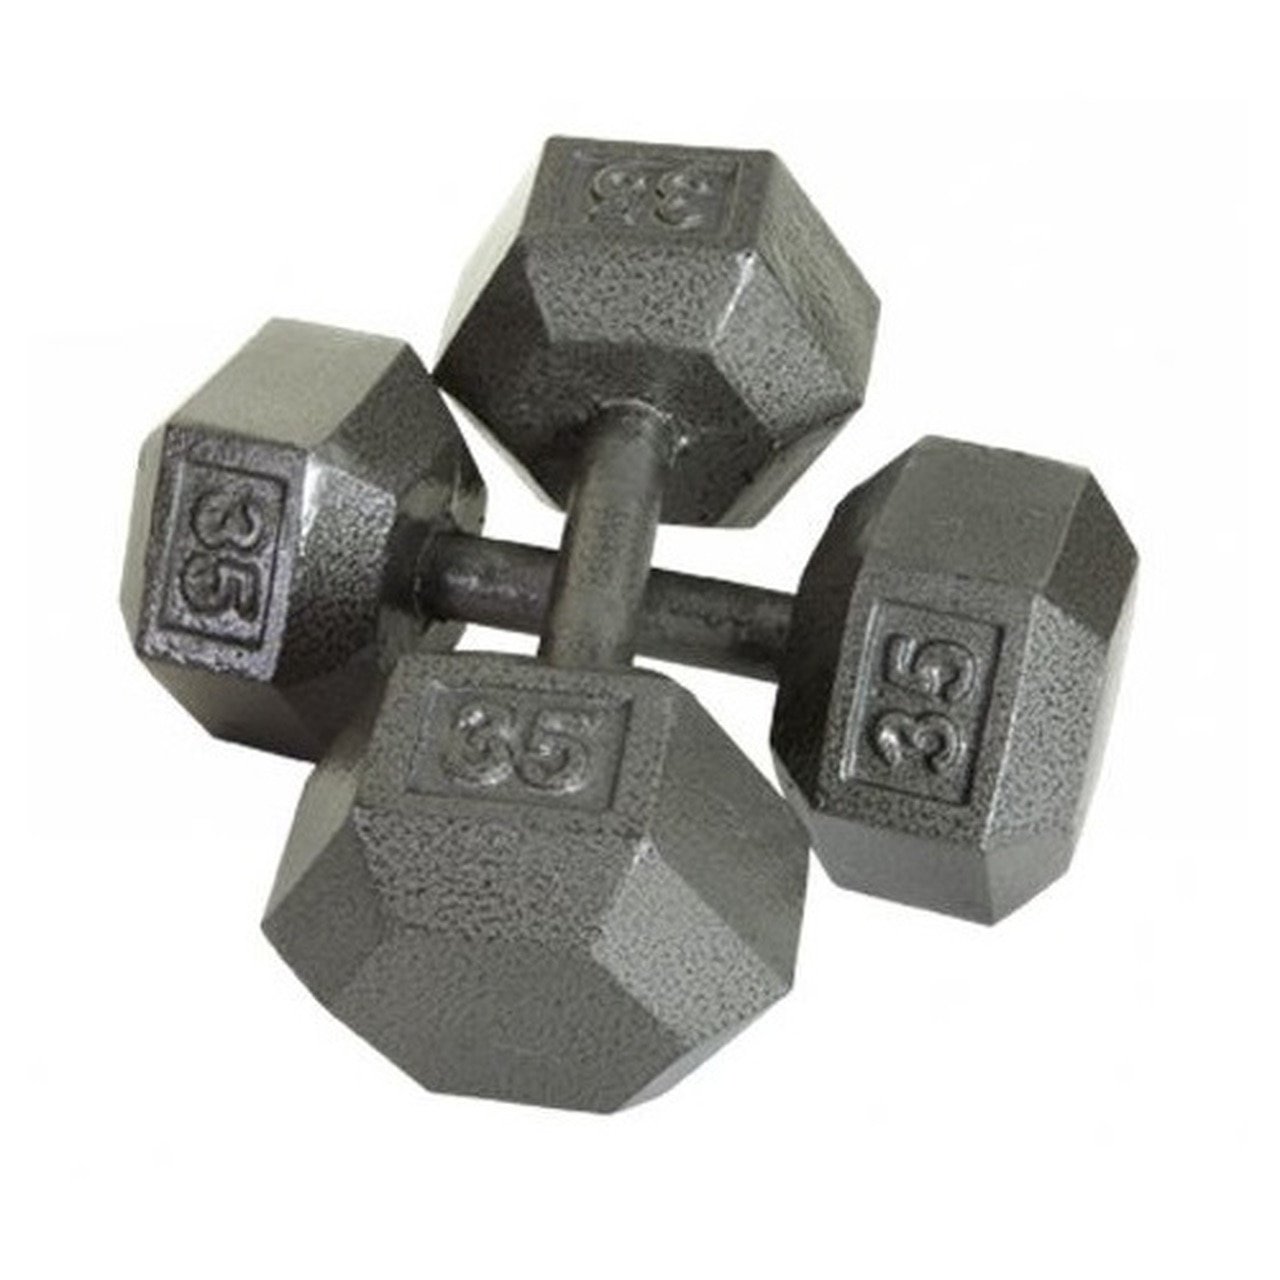 2Lb Troy USA Hex Dumbbell Second Generation - IHD-002G2